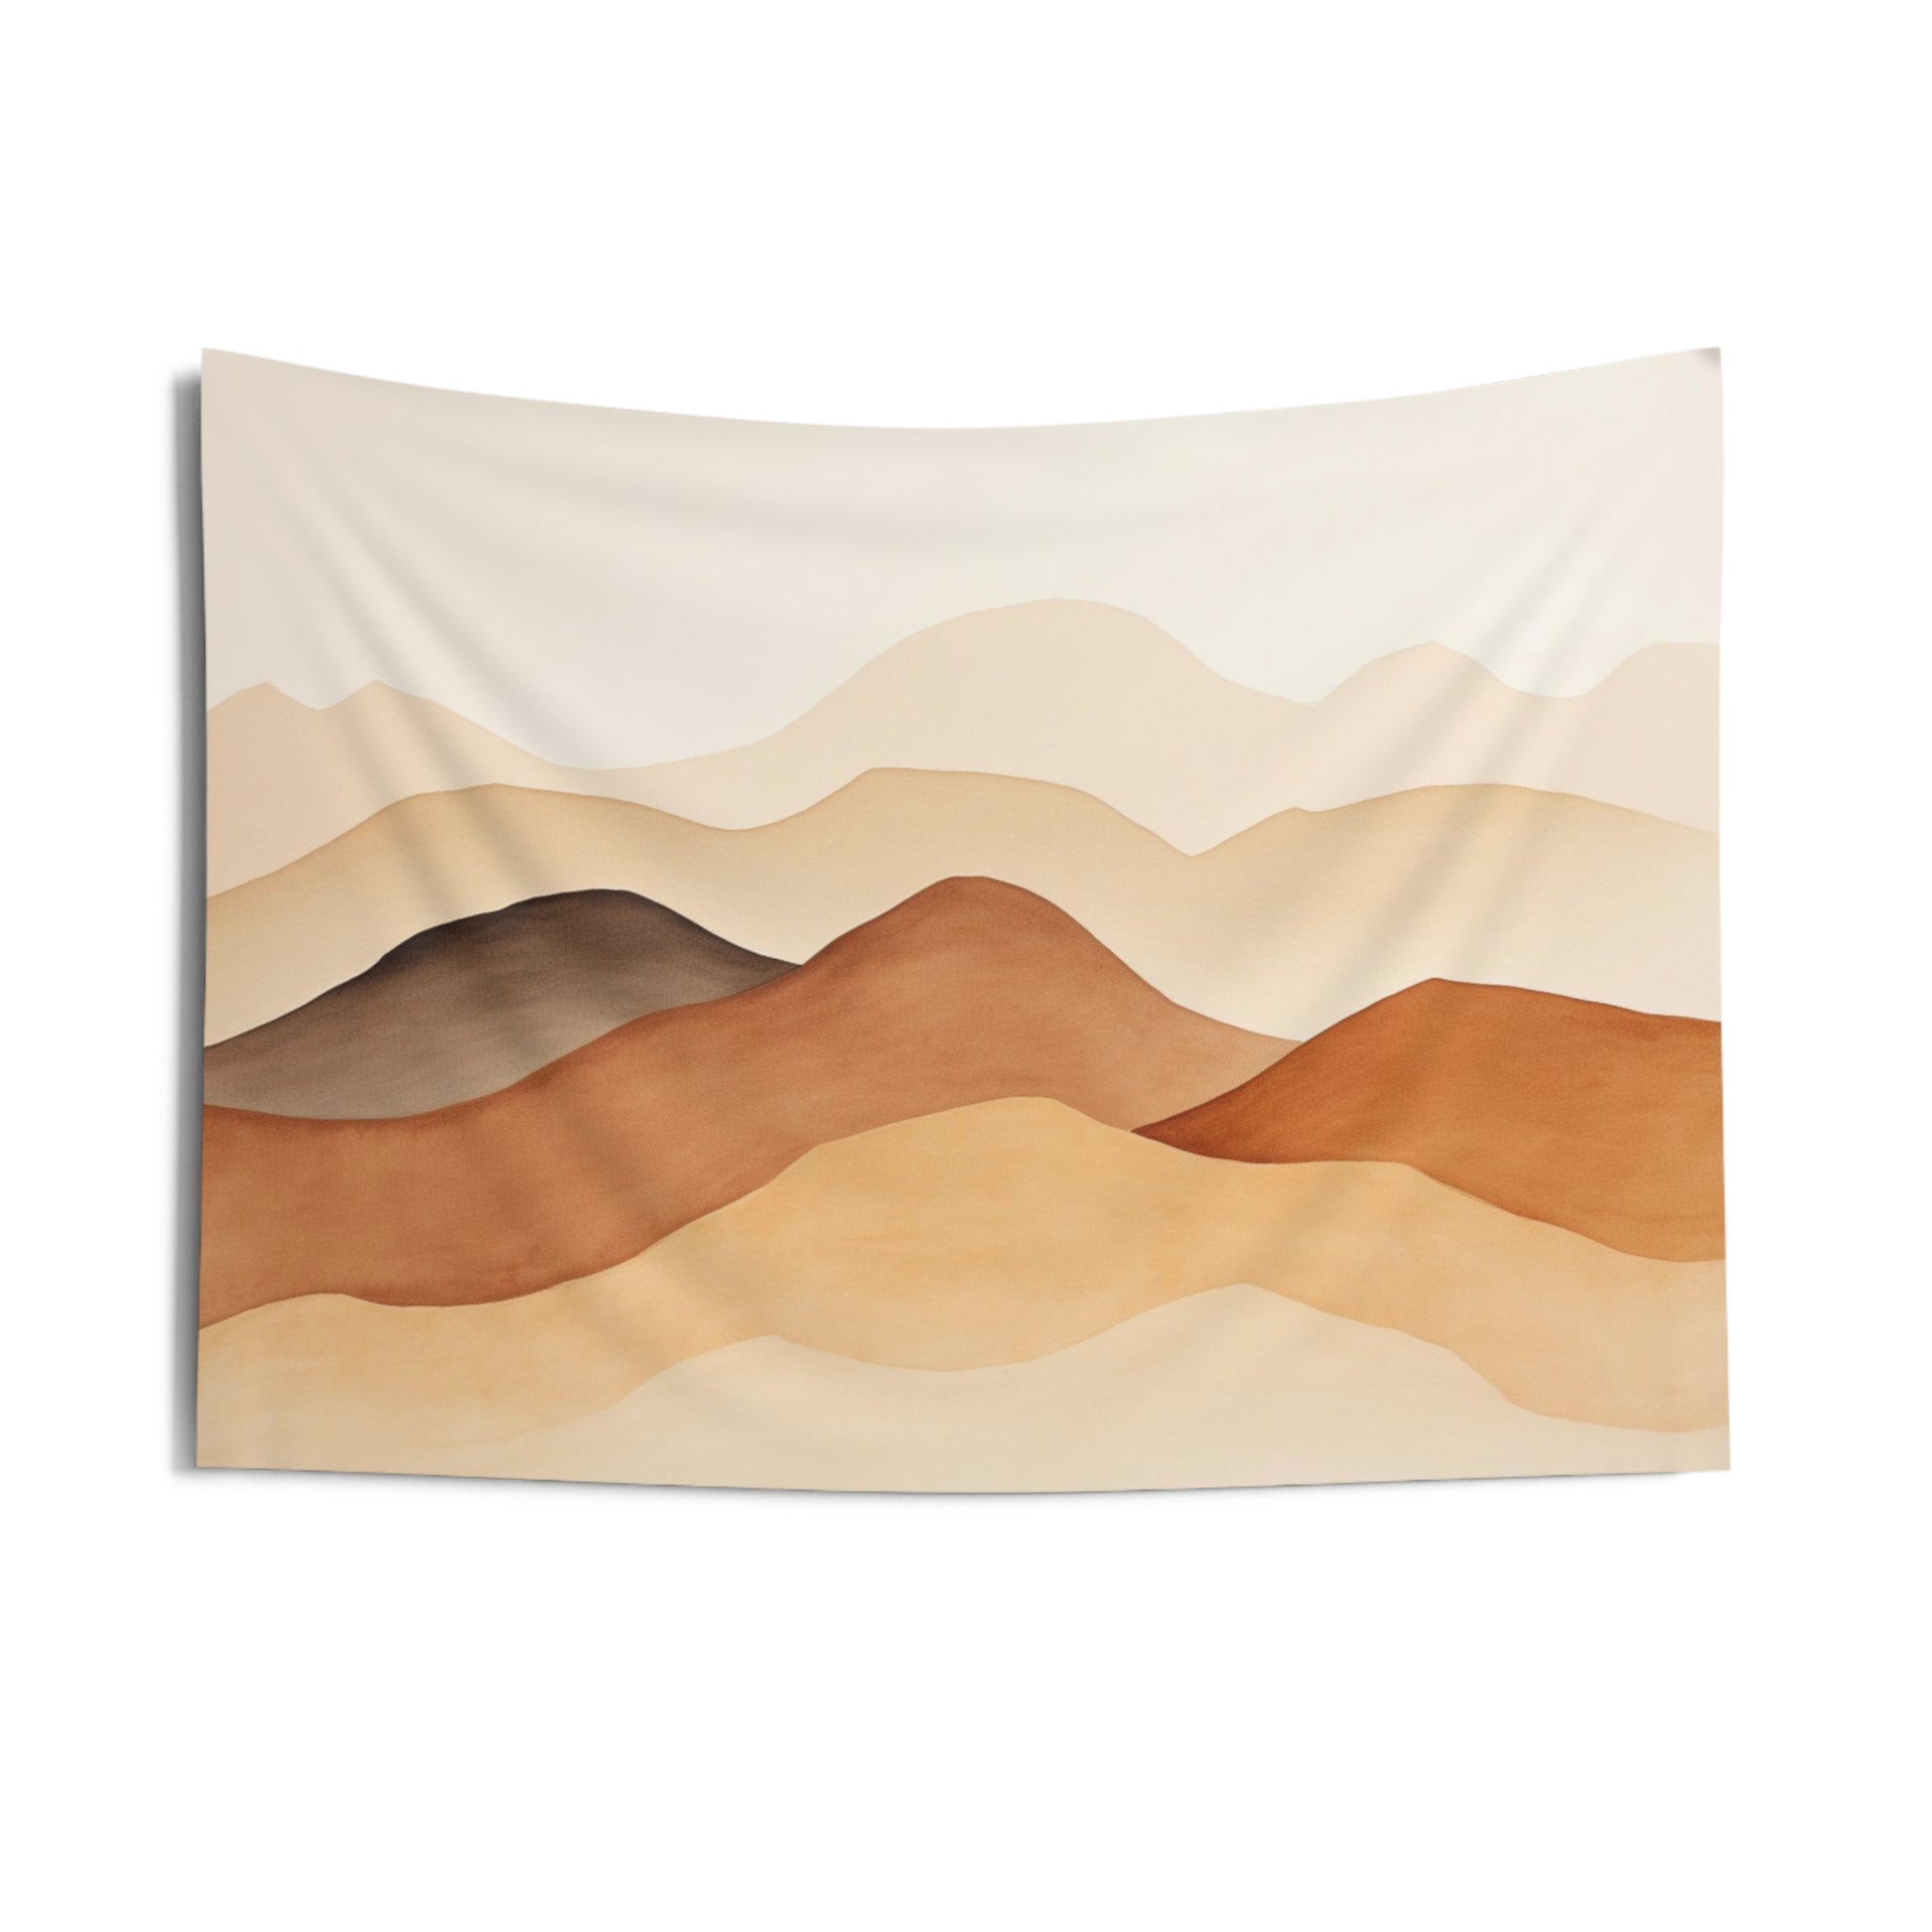 Earth Tone Tapestry, Brown Mountains minimalistic Wall Art Hanging Cool Unique Landscape Aesthetic Large Small Decor Bedroom Dorm Room Starcove Fashion